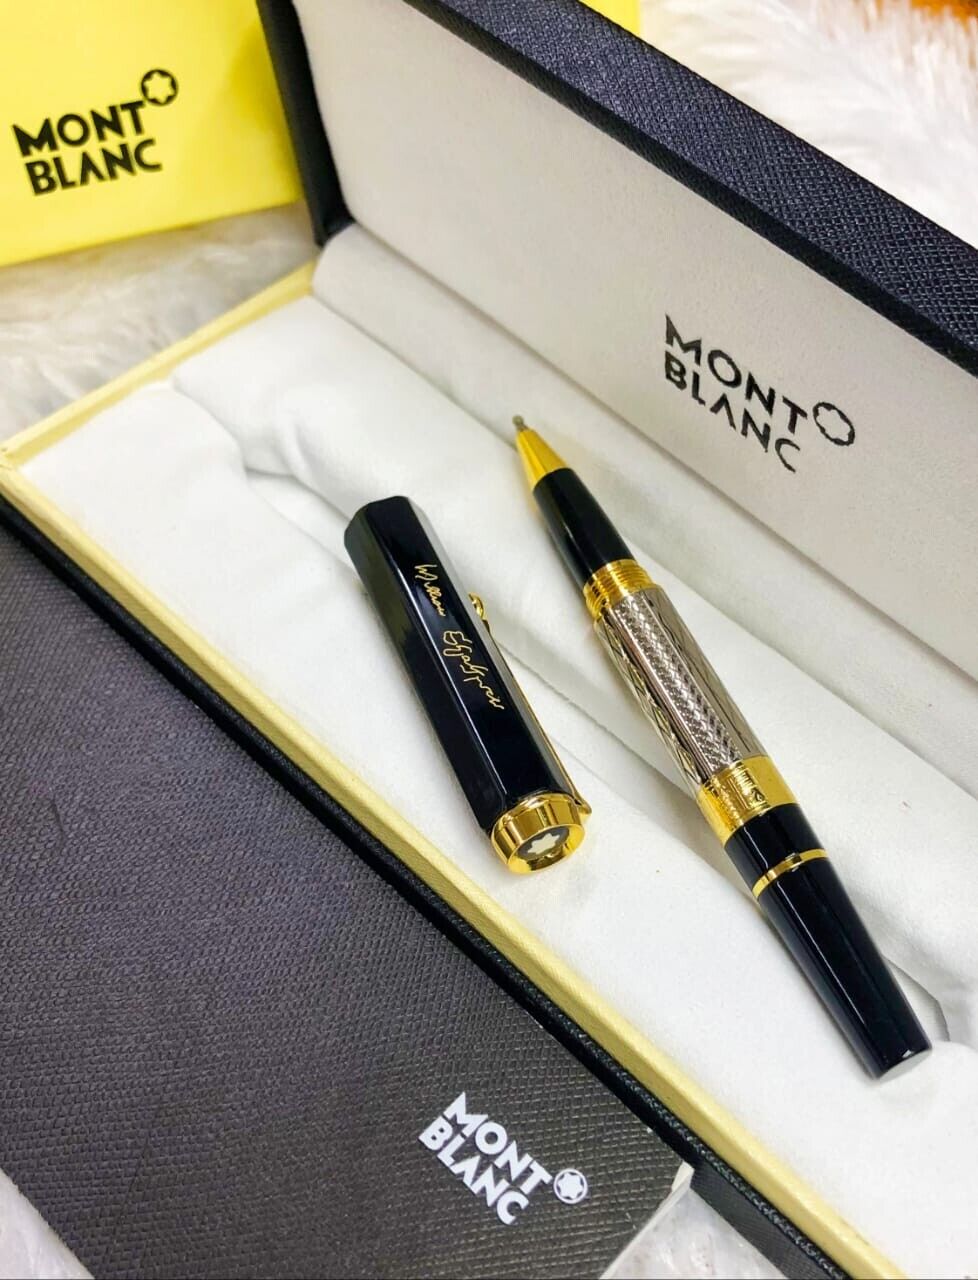 Preowned Montblanc Masterpieces: Authentic Luxury Pens at Unbeatable Prices